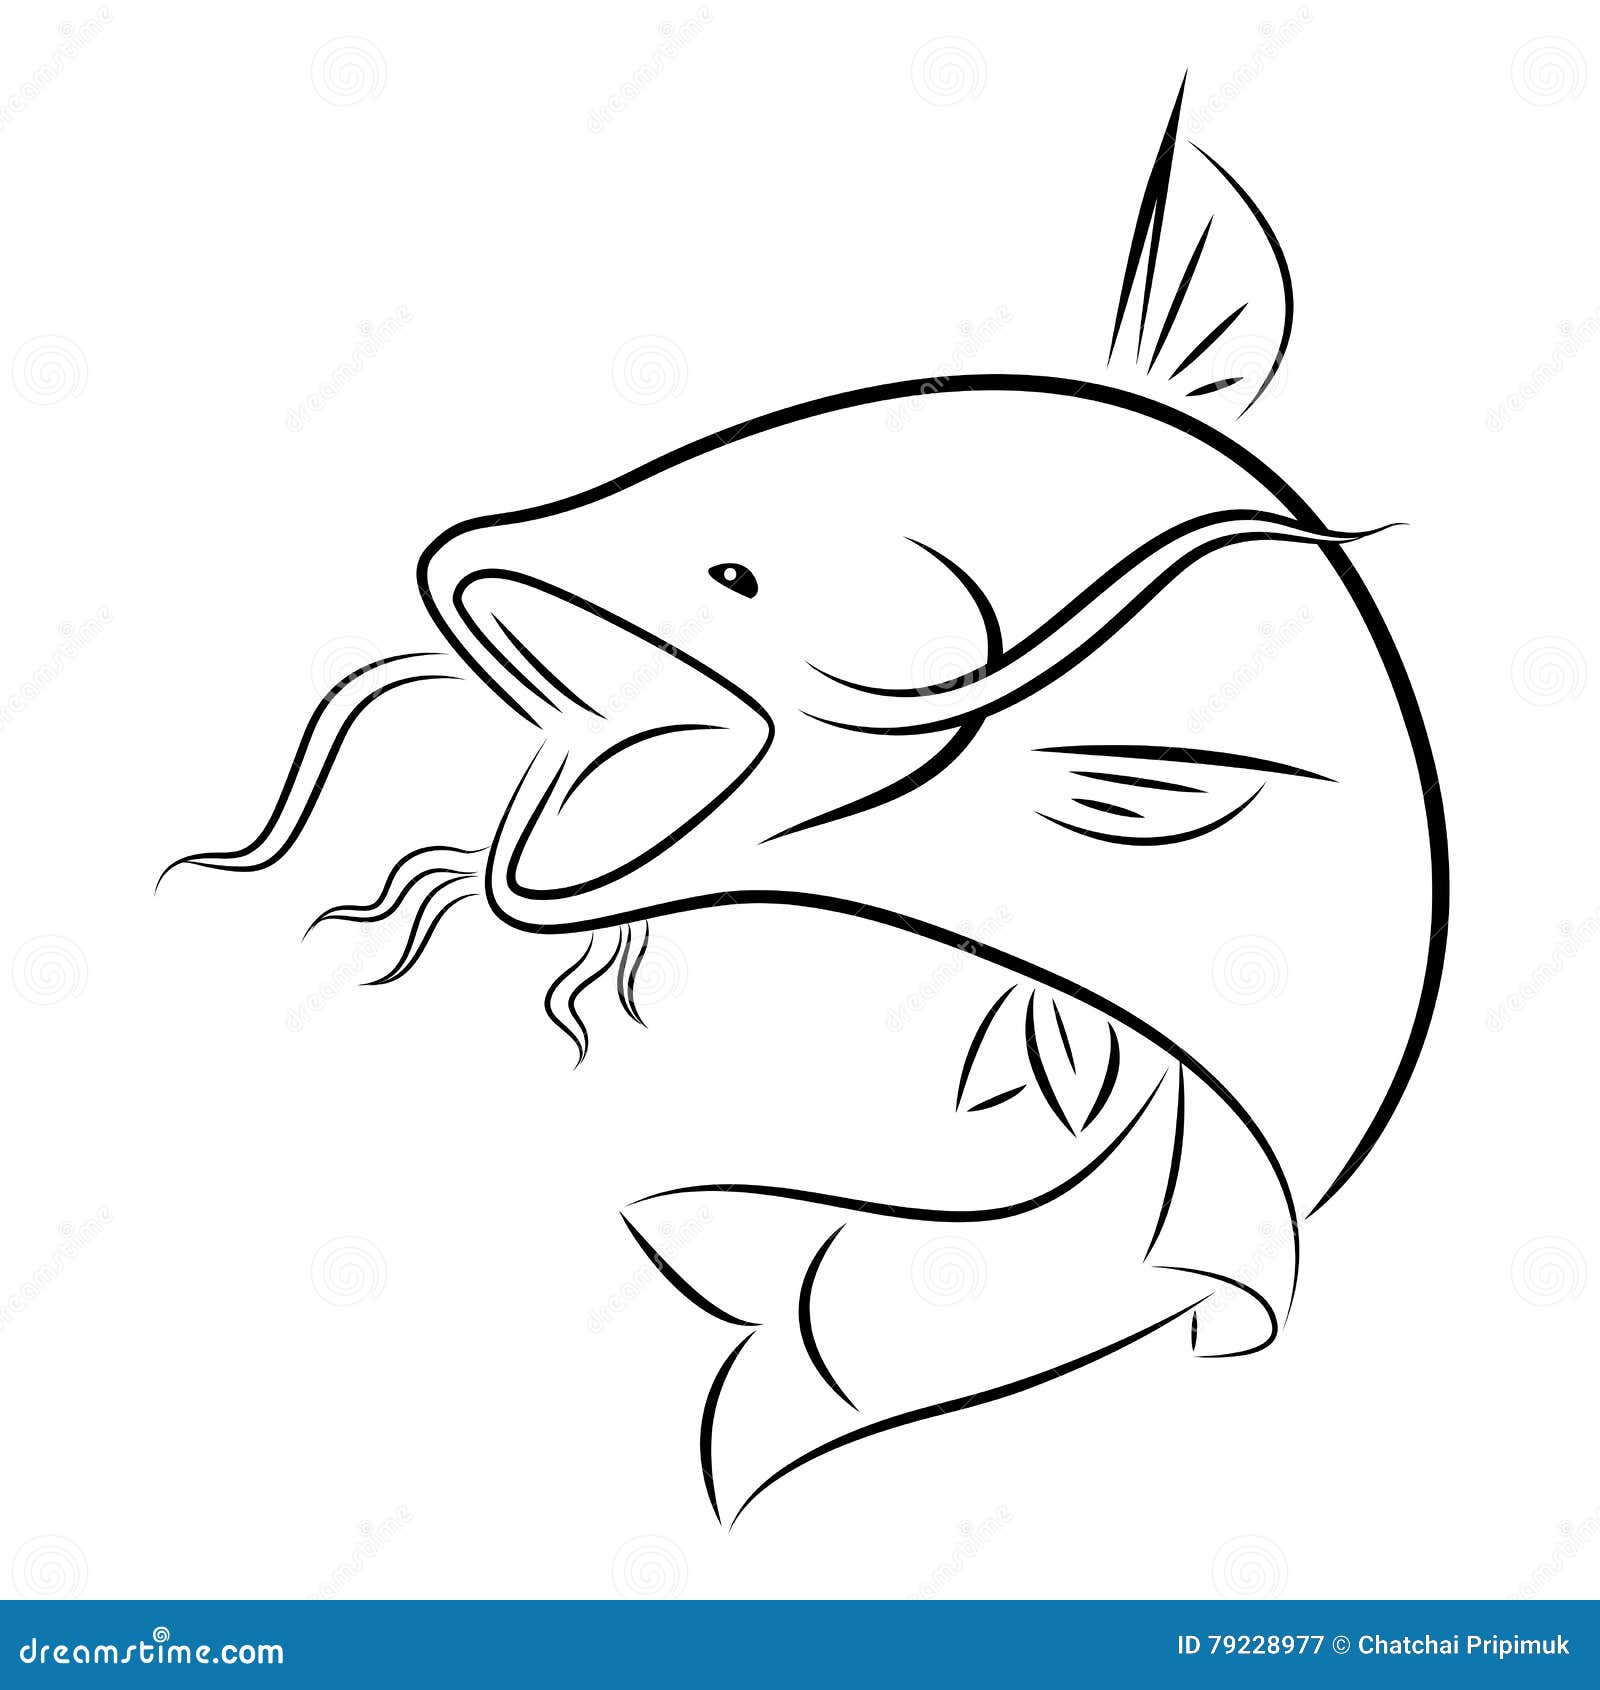 Graphic catfish, vector stock vector. Illustration of vintage - 79228977